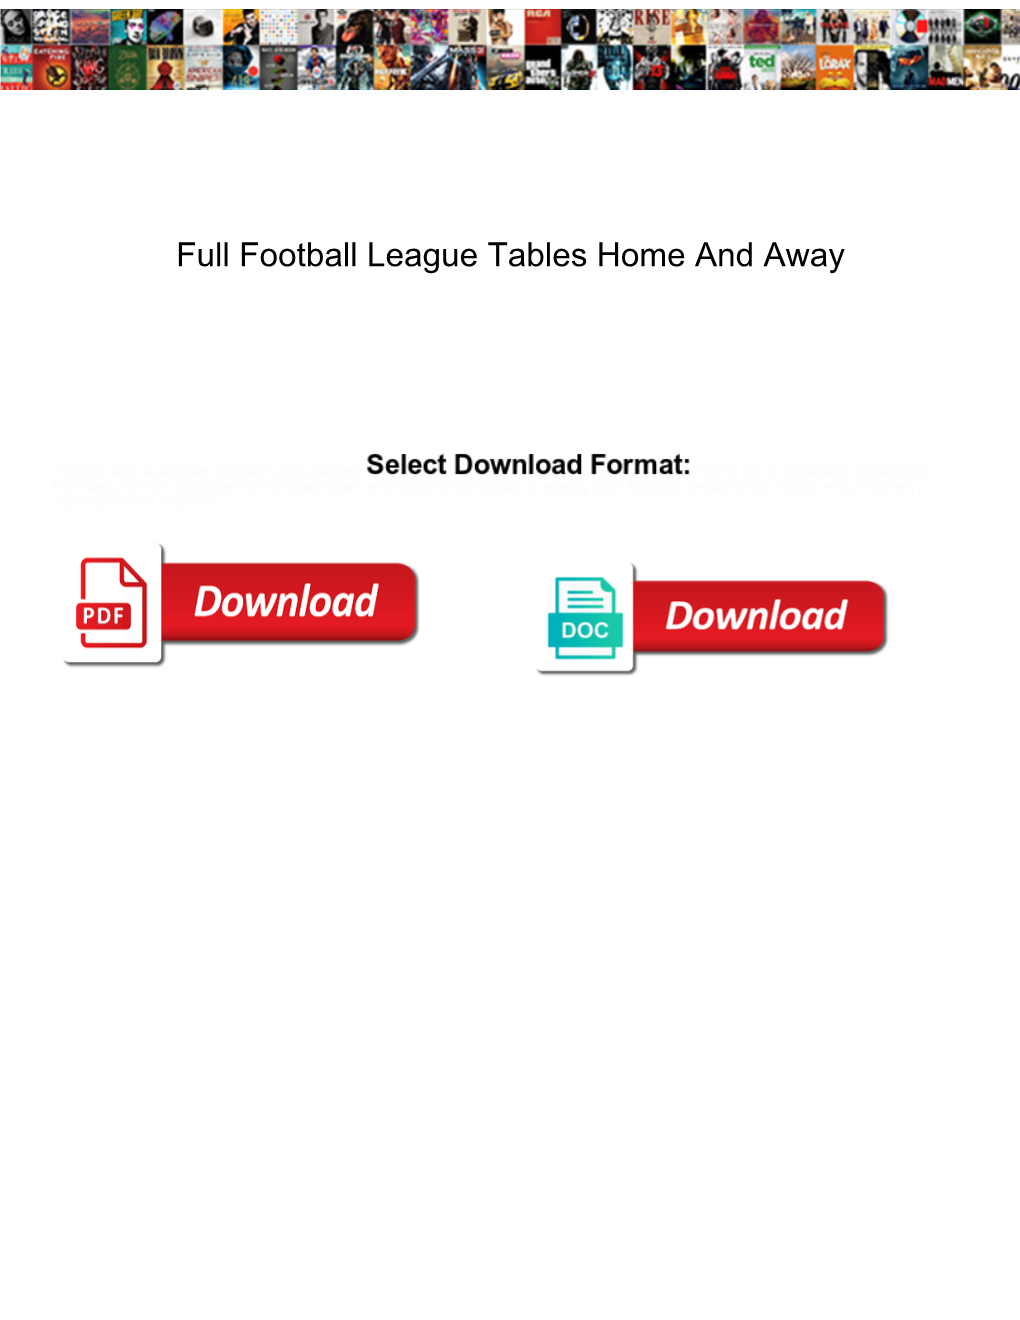 Full Football League Tables Home and Away